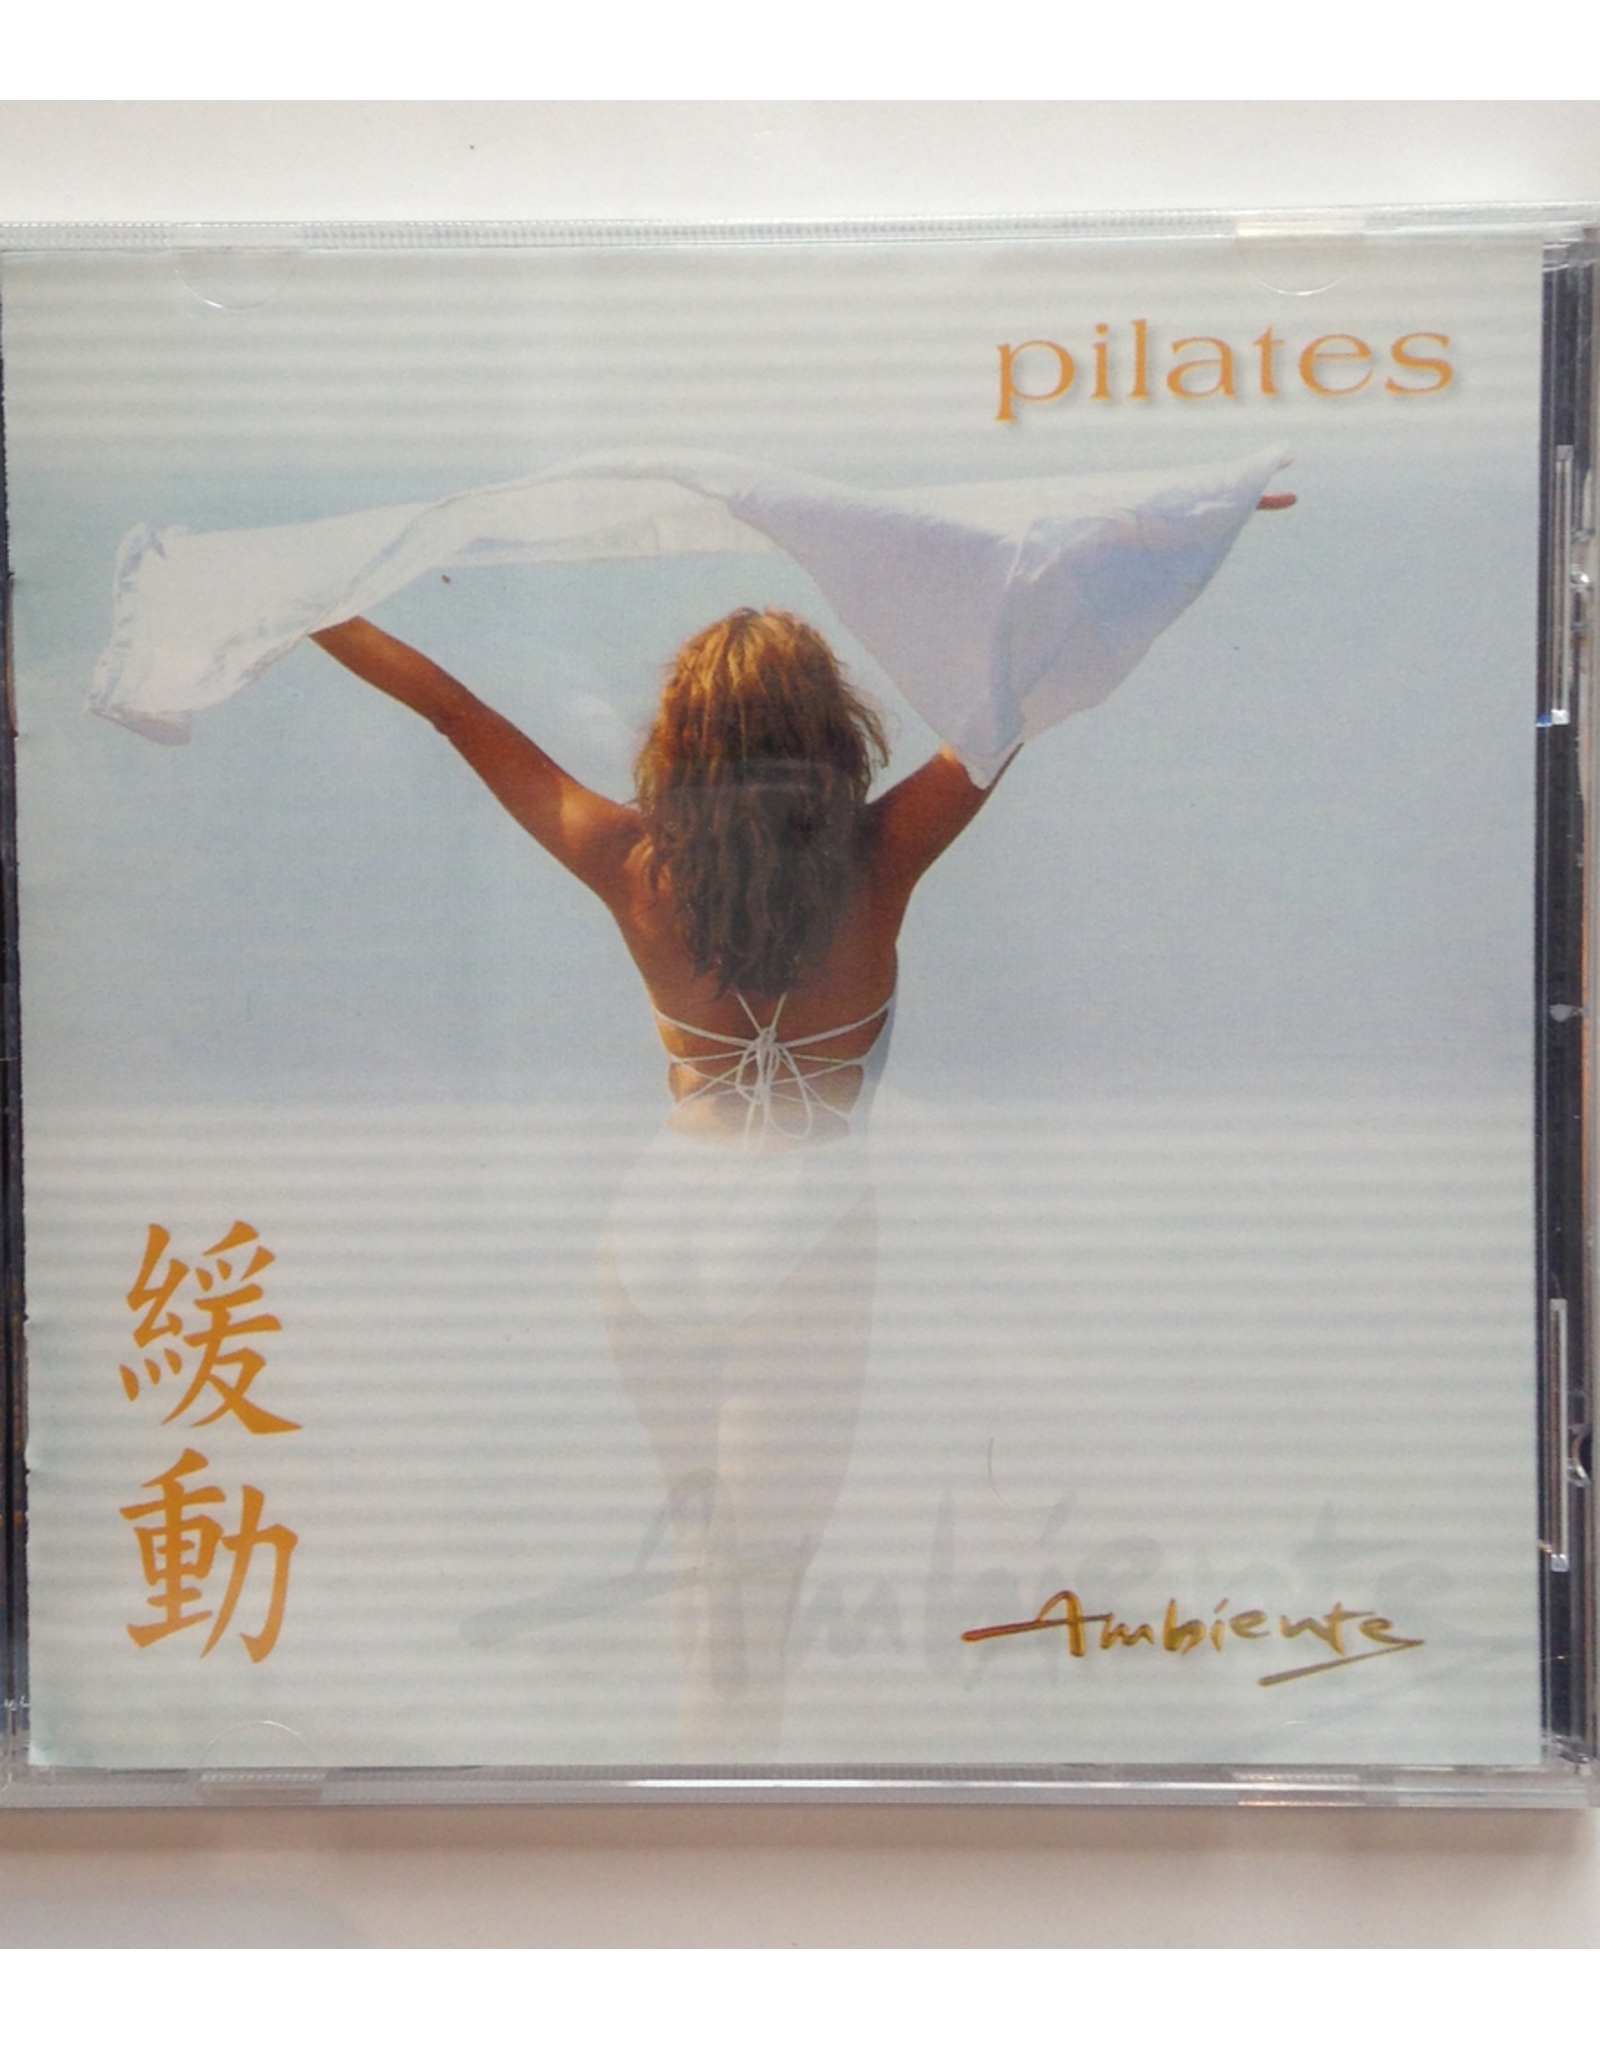 Sugo Music Ambients The Art of Well-Being CD Pilates